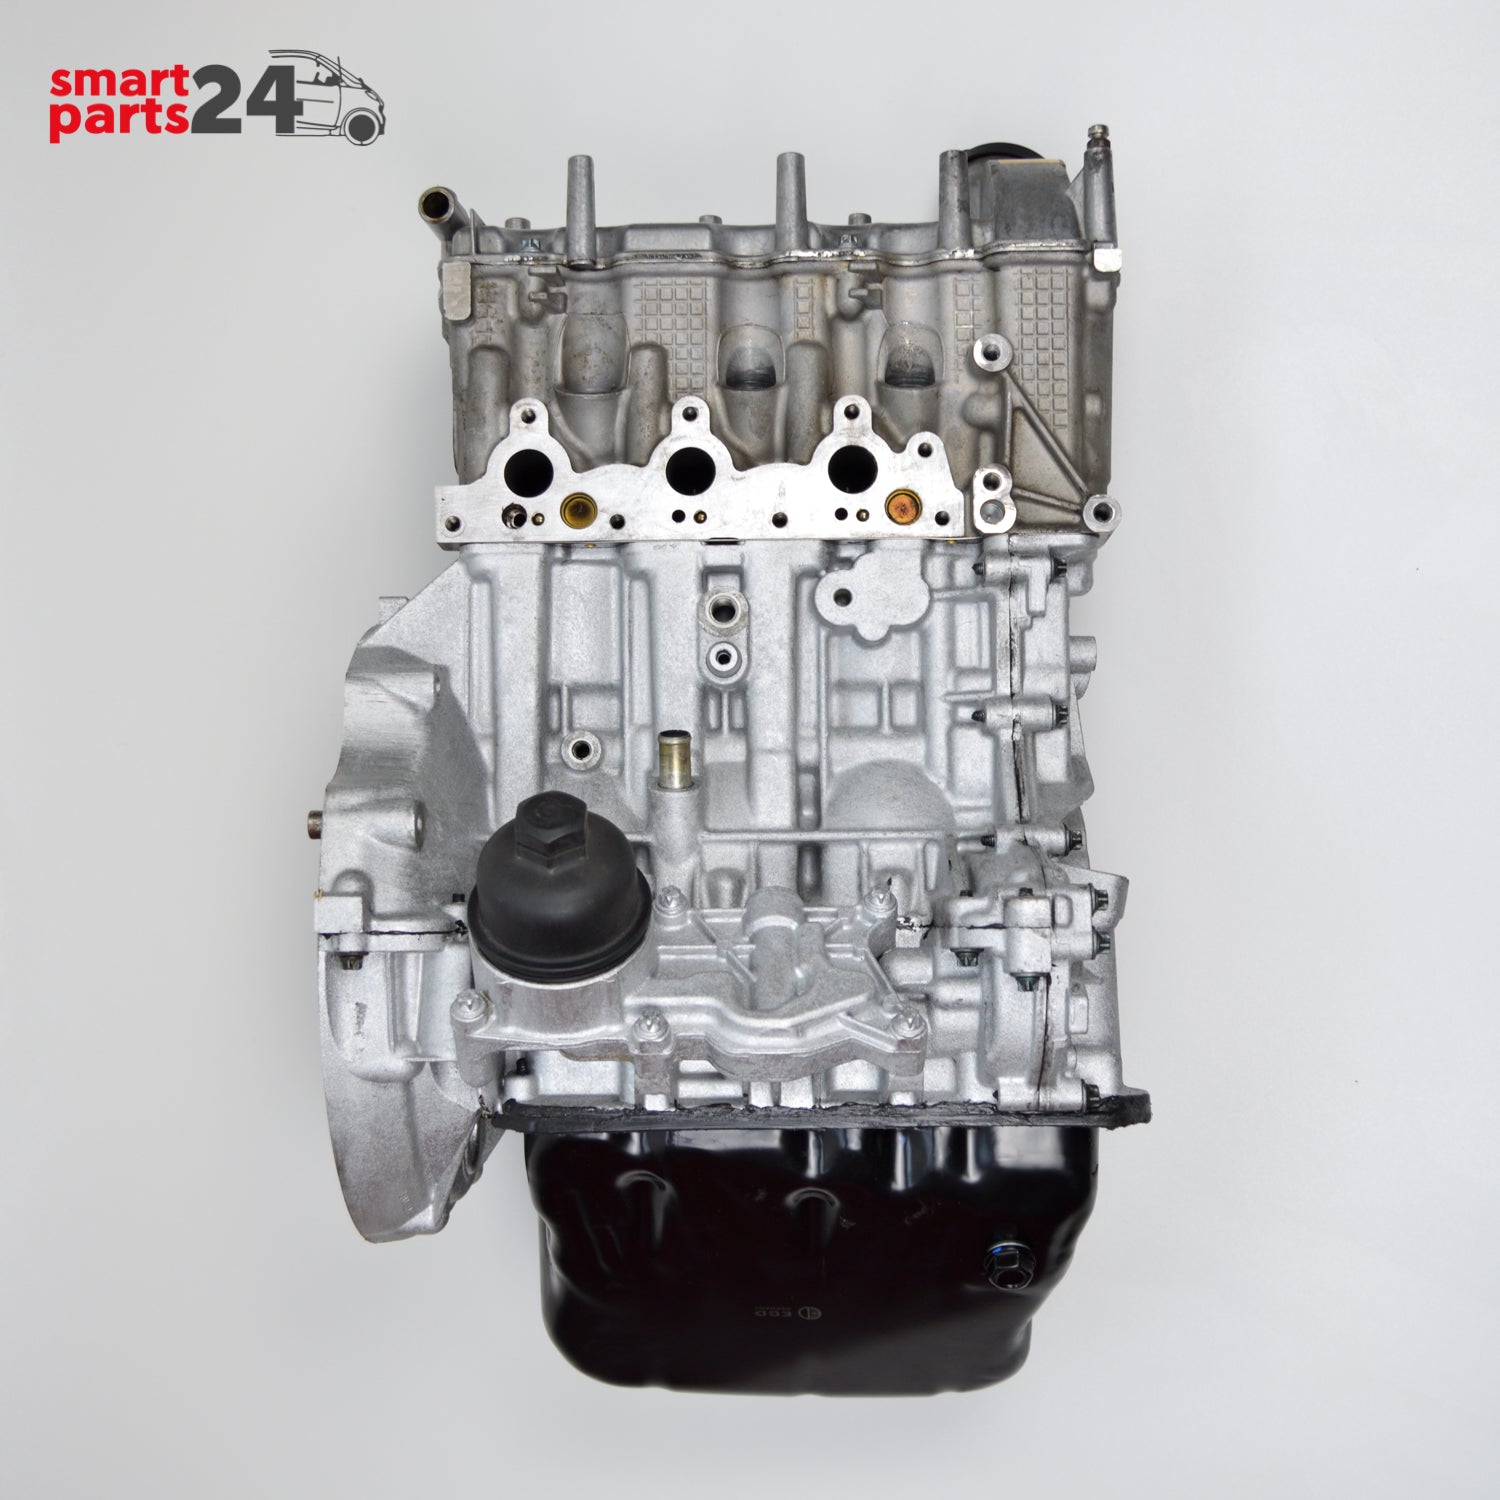 Smart Roadster 452 replacement engine AT engine 698 cc 0.7 60 kW A1600101500